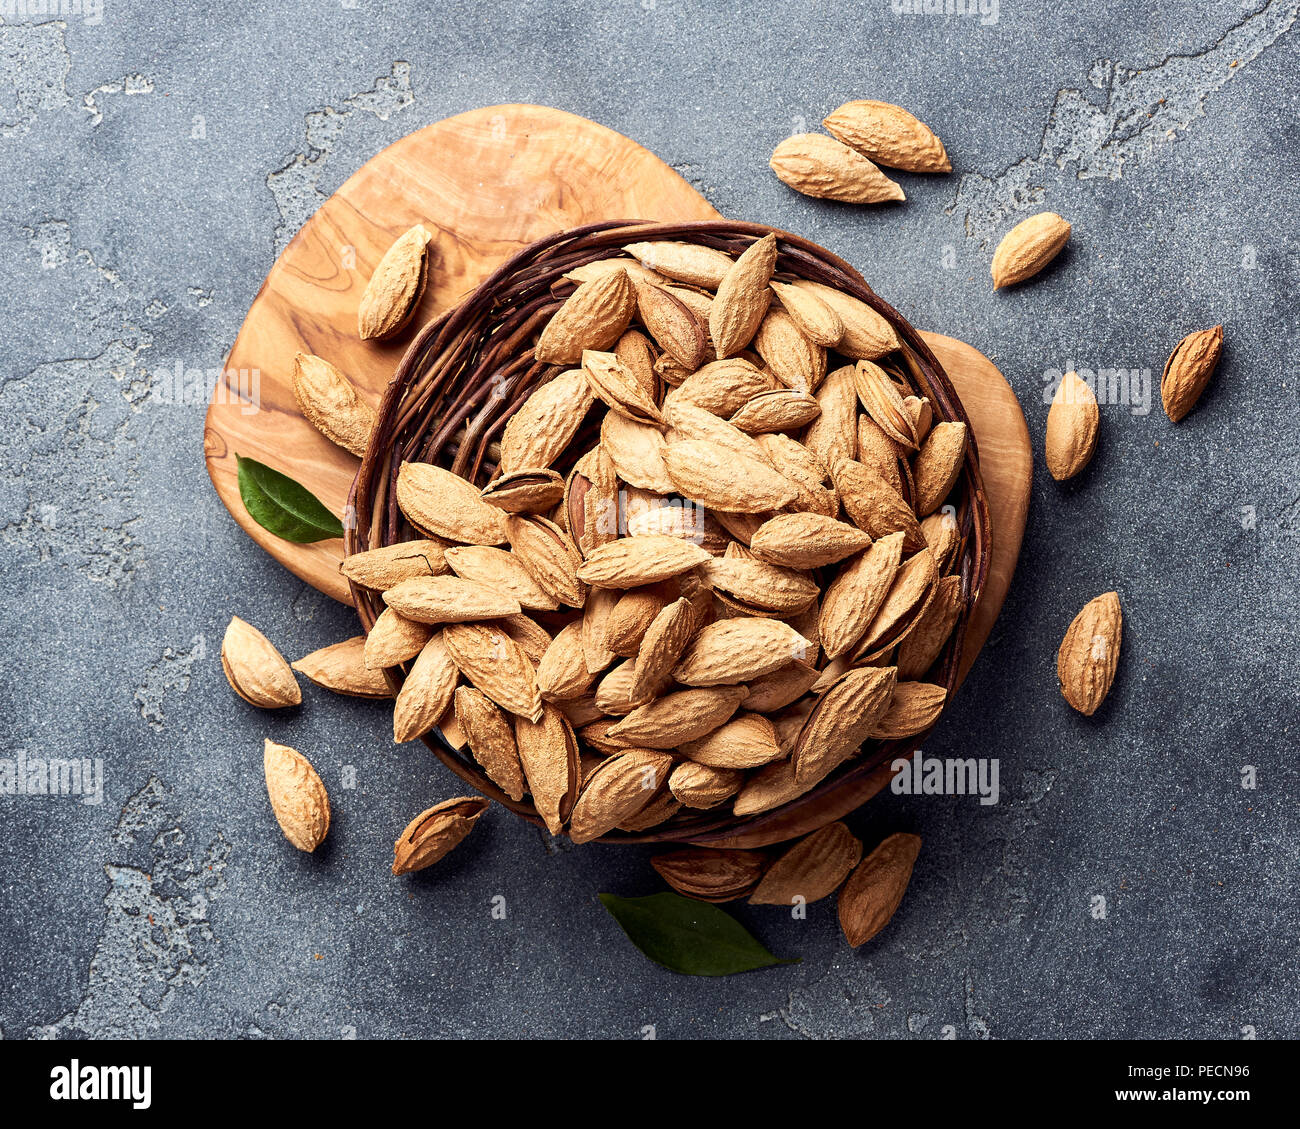 Unshelled almonds on gray concrete background. Top view. Stock Photo